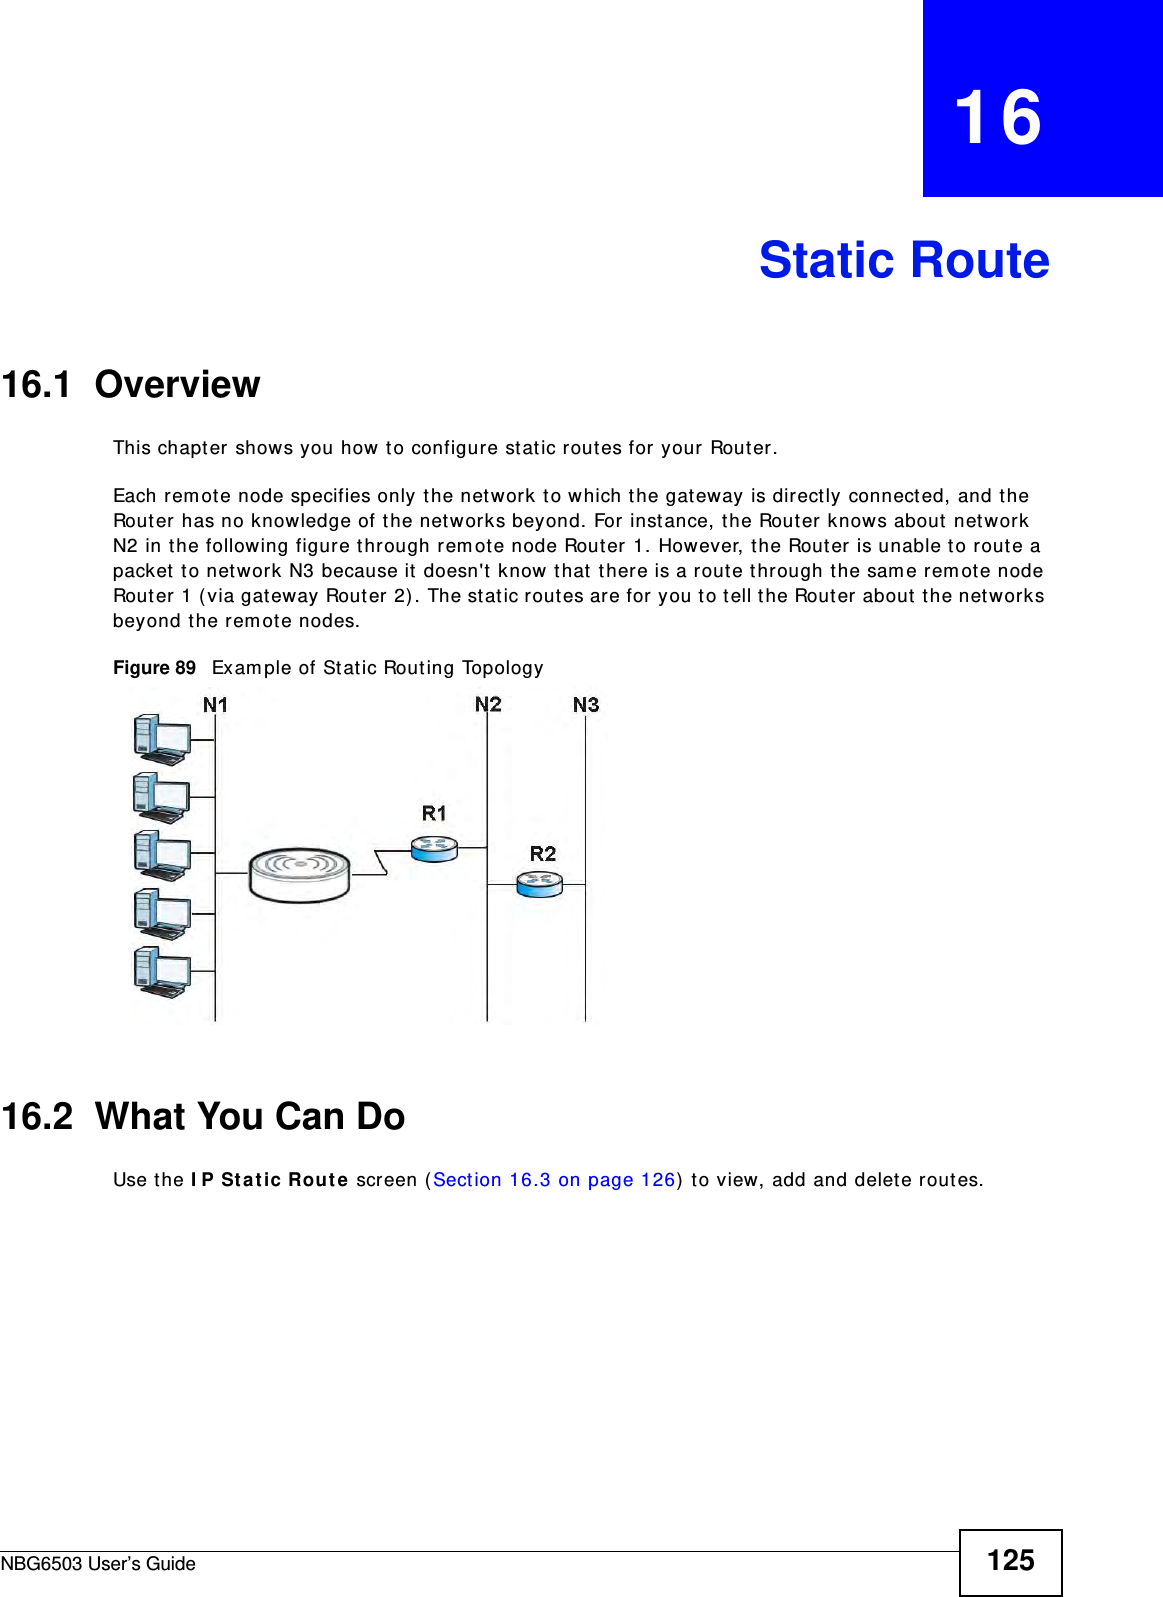 NBG6503 User’s Guide 125CHAPTER   16Static Route16.1  Overview   This chapter shows you how to configure static routes for your Router.Each remote node specifies only the network to which the gateway is directly connected, and the Router has no knowledge of the networks beyond. For instance, the Router knows about network N2 in the following figure through remote node Router 1. However, the Router is unable to route a packet to network N3 because it doesn&apos;t know that there is a route through the same remote node Router 1 (via gateway Router 2). The static routes are for you to tell the Router about the networks beyond the remote nodes.Figure 89   Example of Static Routing Topology16.2  What You Can DoUse the IP Static Route screen (Section 16.3 on page 126) to view, add and delete routes.